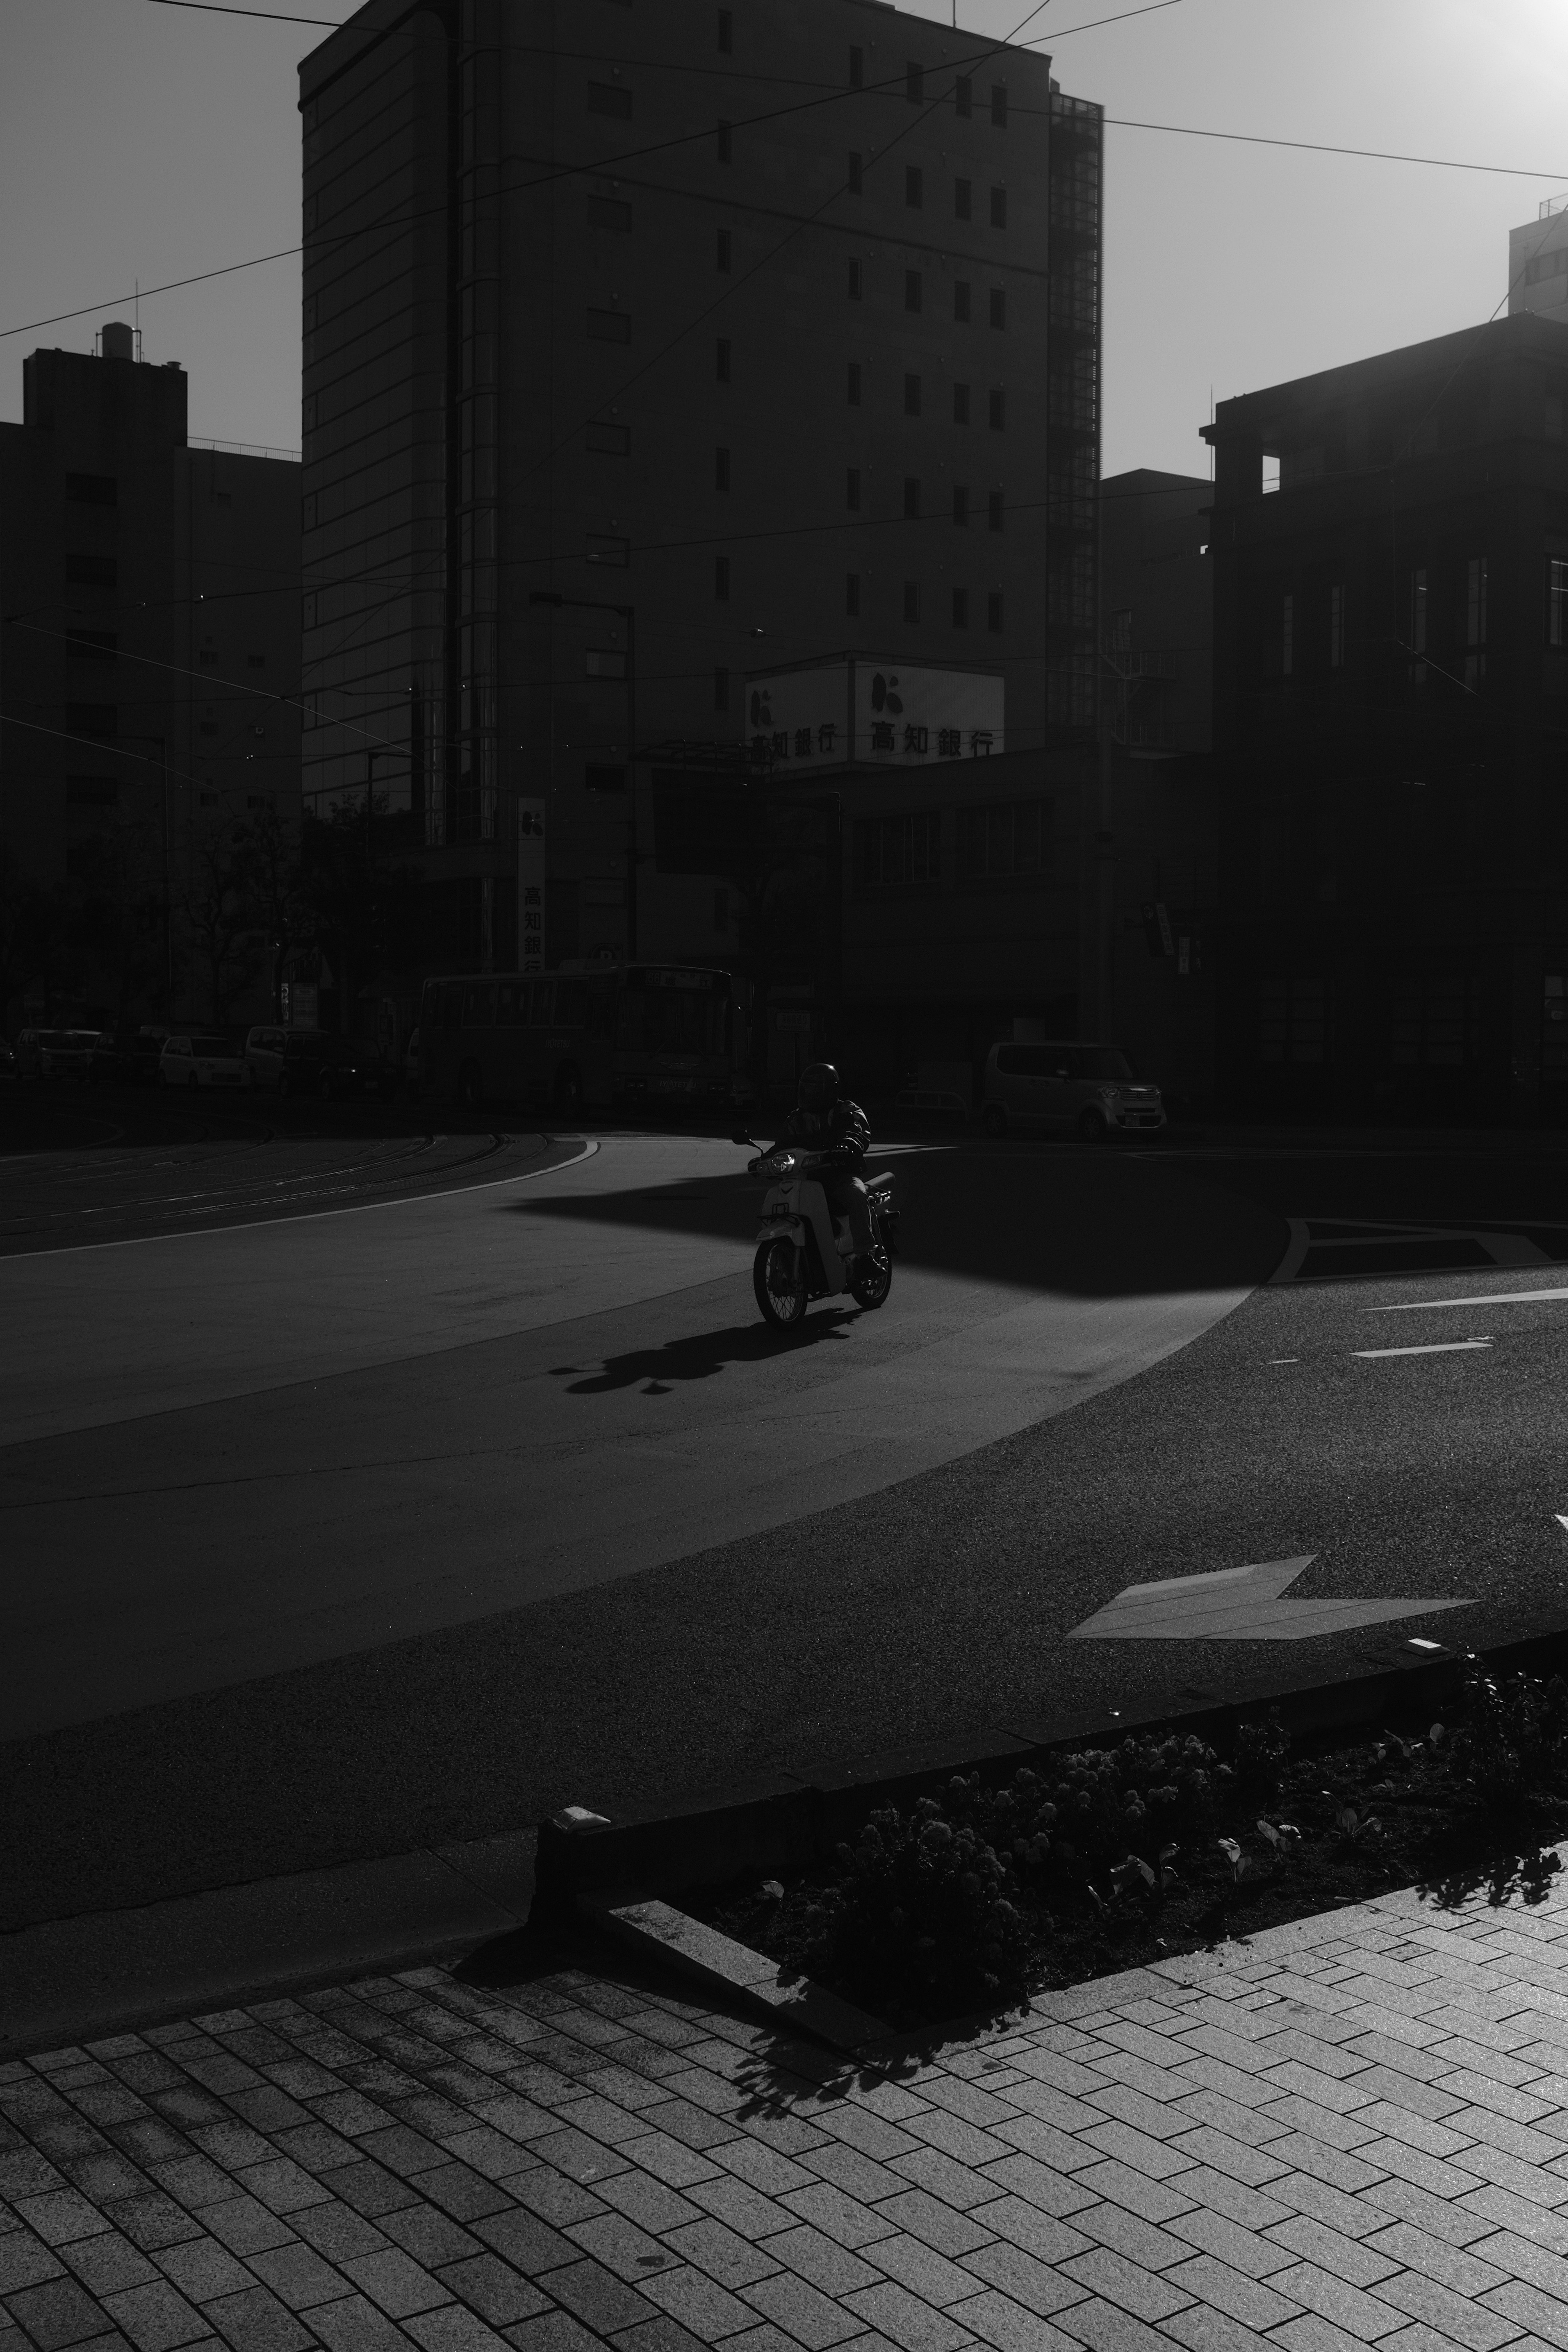 grayscale photo of man riding motorcycle on road